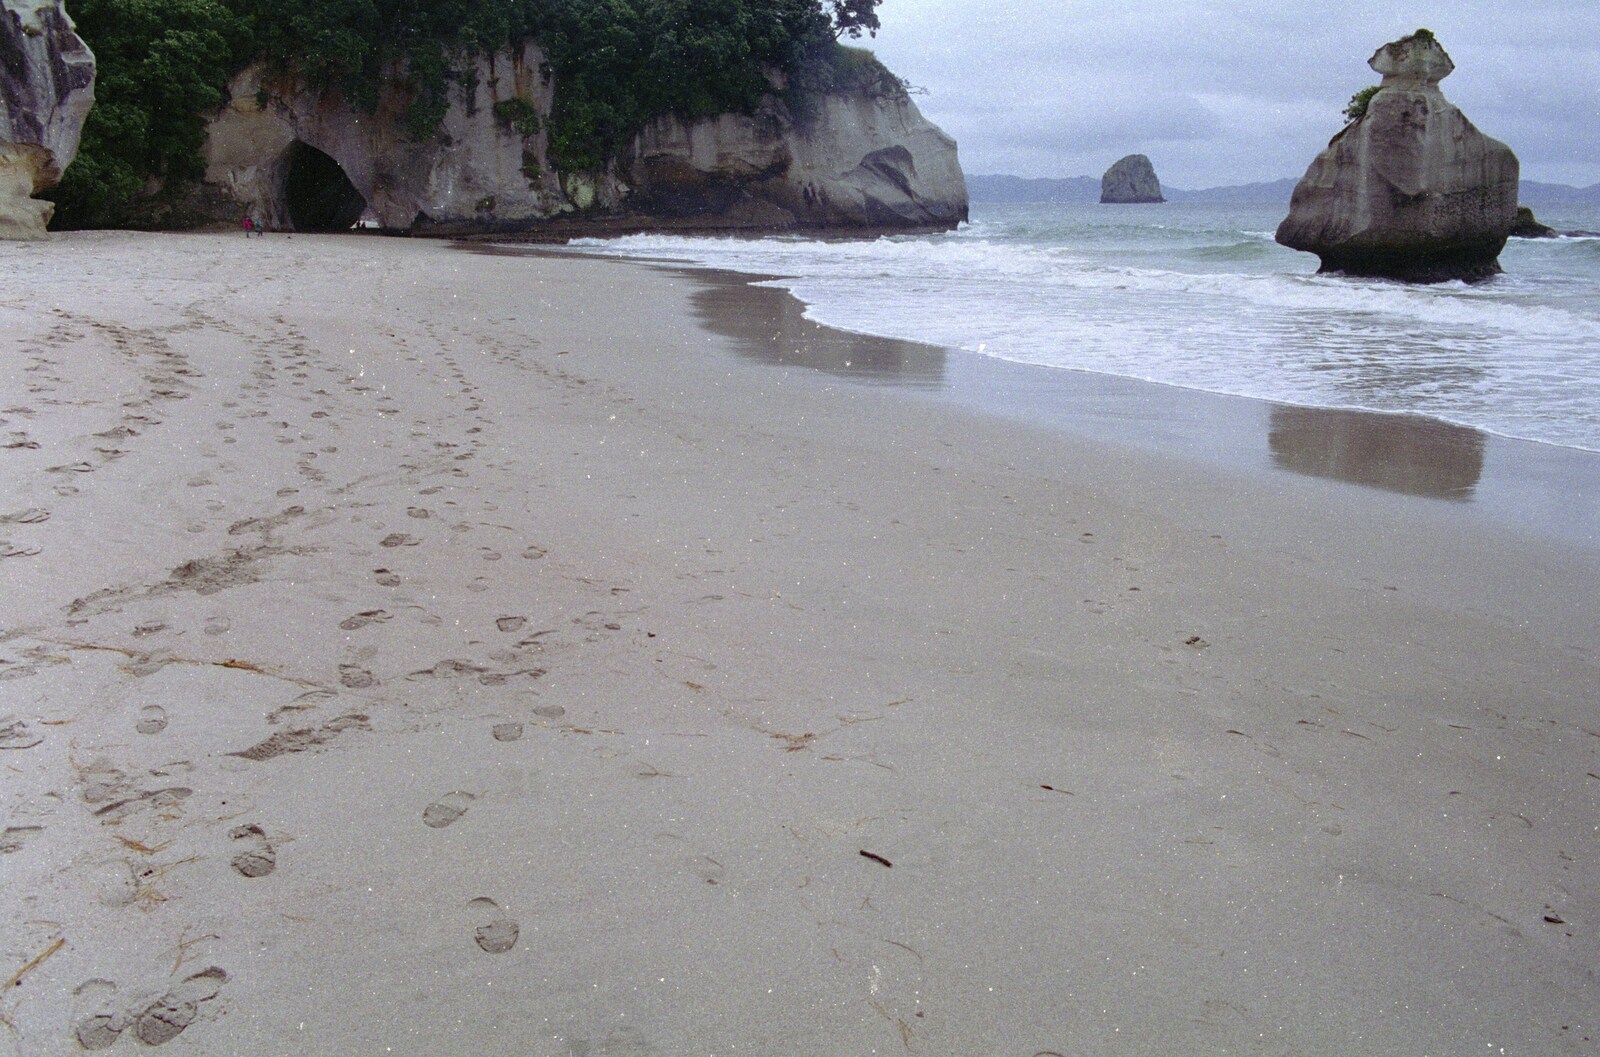 Footprints on the beach at Cathedral Cove from Ferry Landing, Whitianga, New Zealand - 23rd November 1992